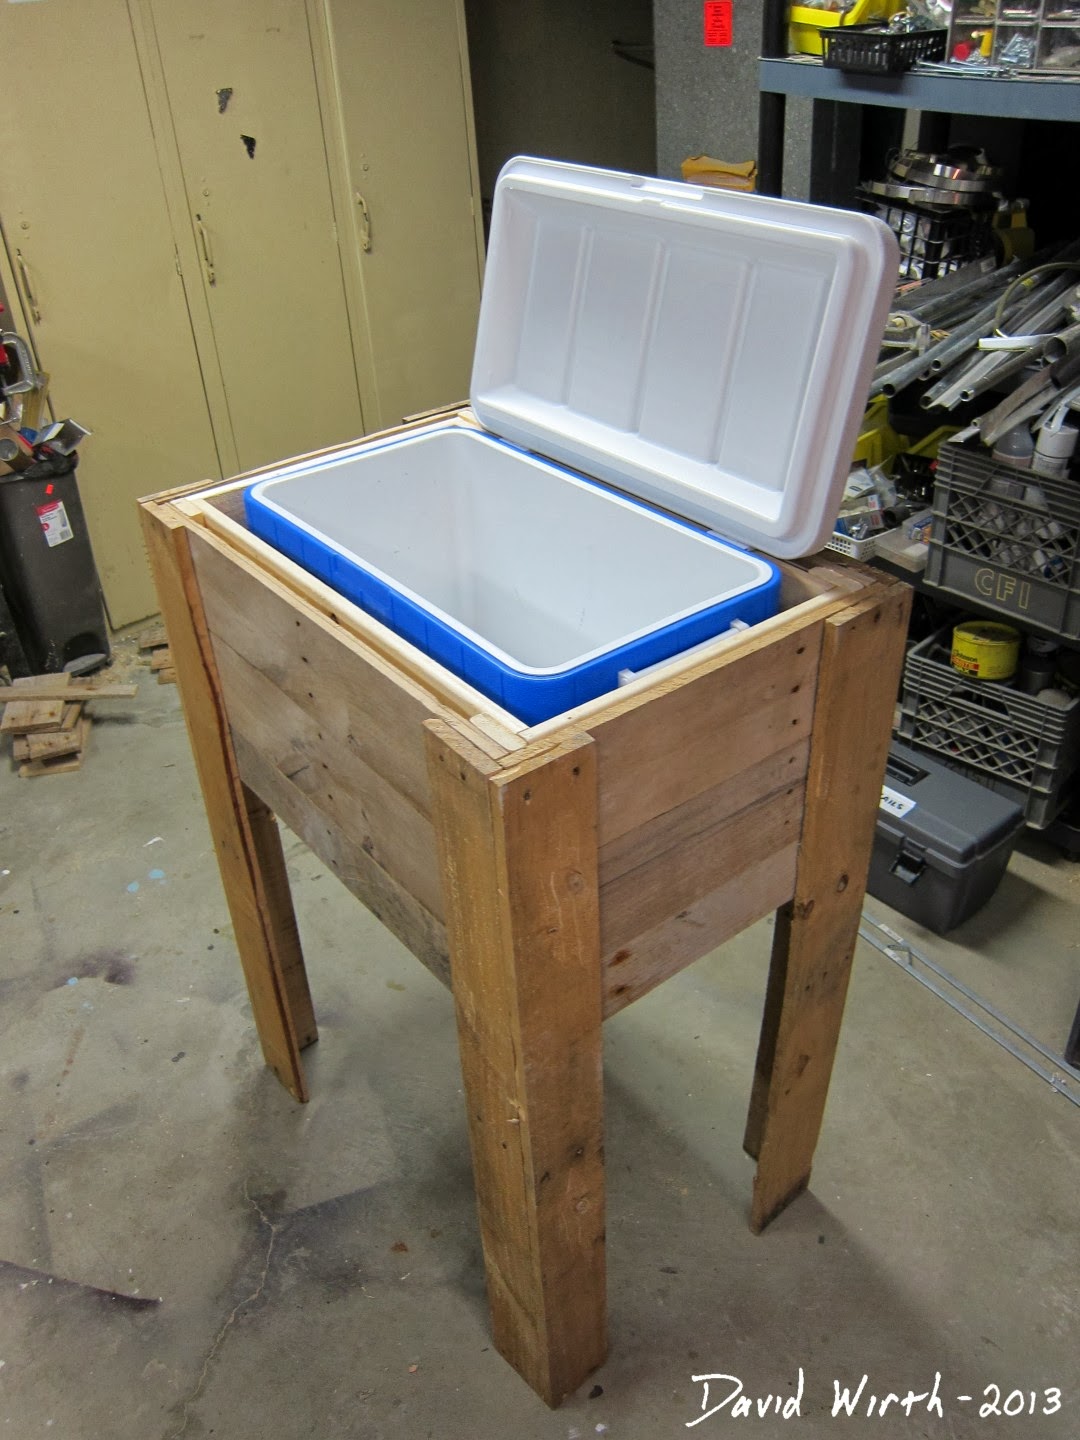 After the surface was done I started to make the lid which would cover 